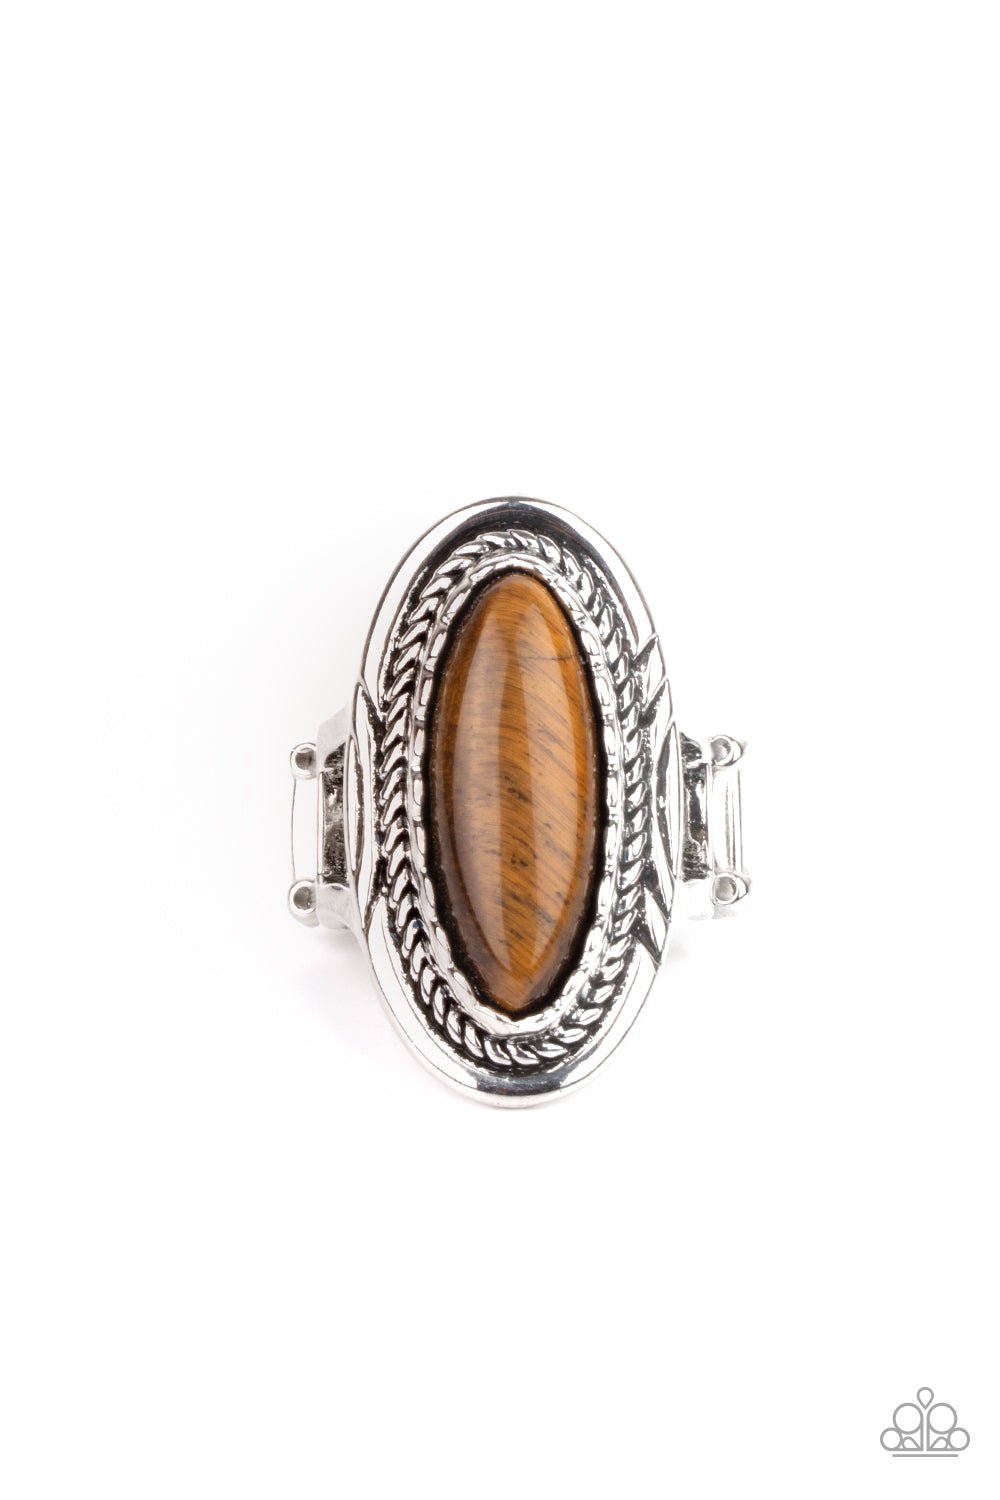 Primal Instincts Brown Ring - Paparazzi Accessories  An oblong tiger's eye stone is pressed into the center of an oval silver frame stamped and embossed in mismatched patterns for a seasonal flair. Features a stretchy band for a flexible fit.  ﻿All Paparazzi Accessories are lead free and nickel free!  Sold as one individual ring.